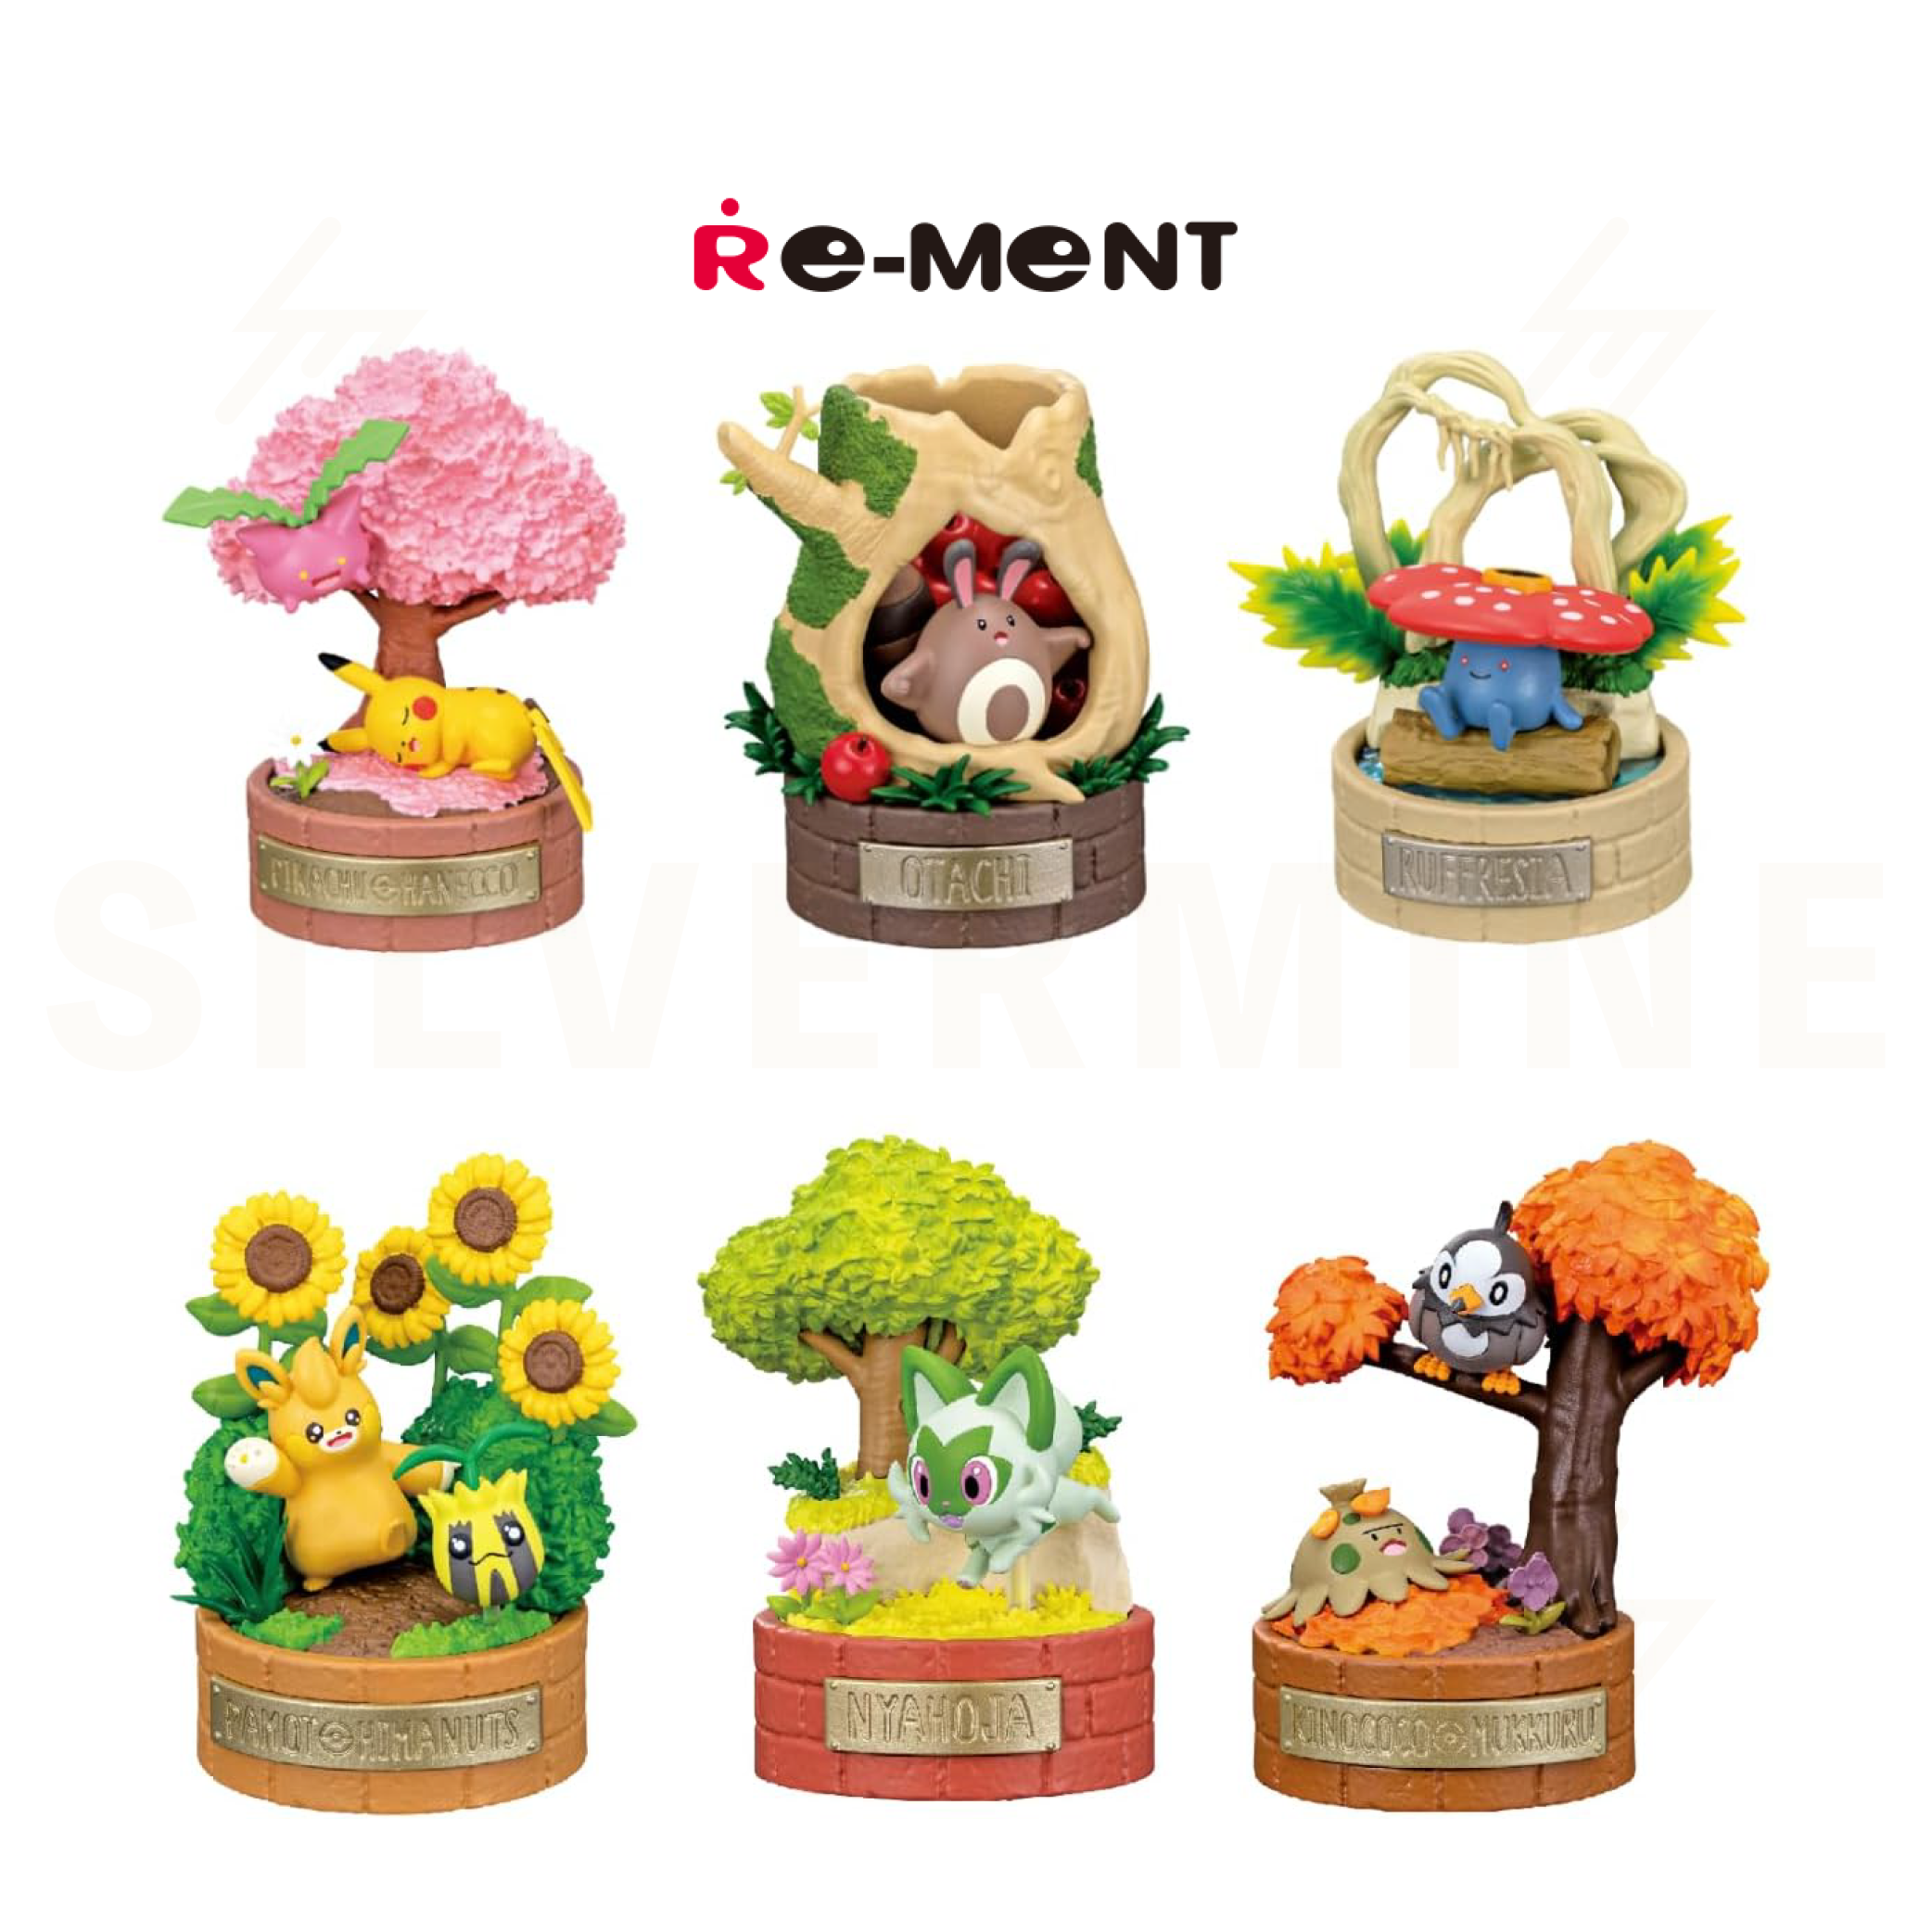 PRE-ORDER: Re-Ment - Blind Box - Pokemon - A Little Tale of the Forest